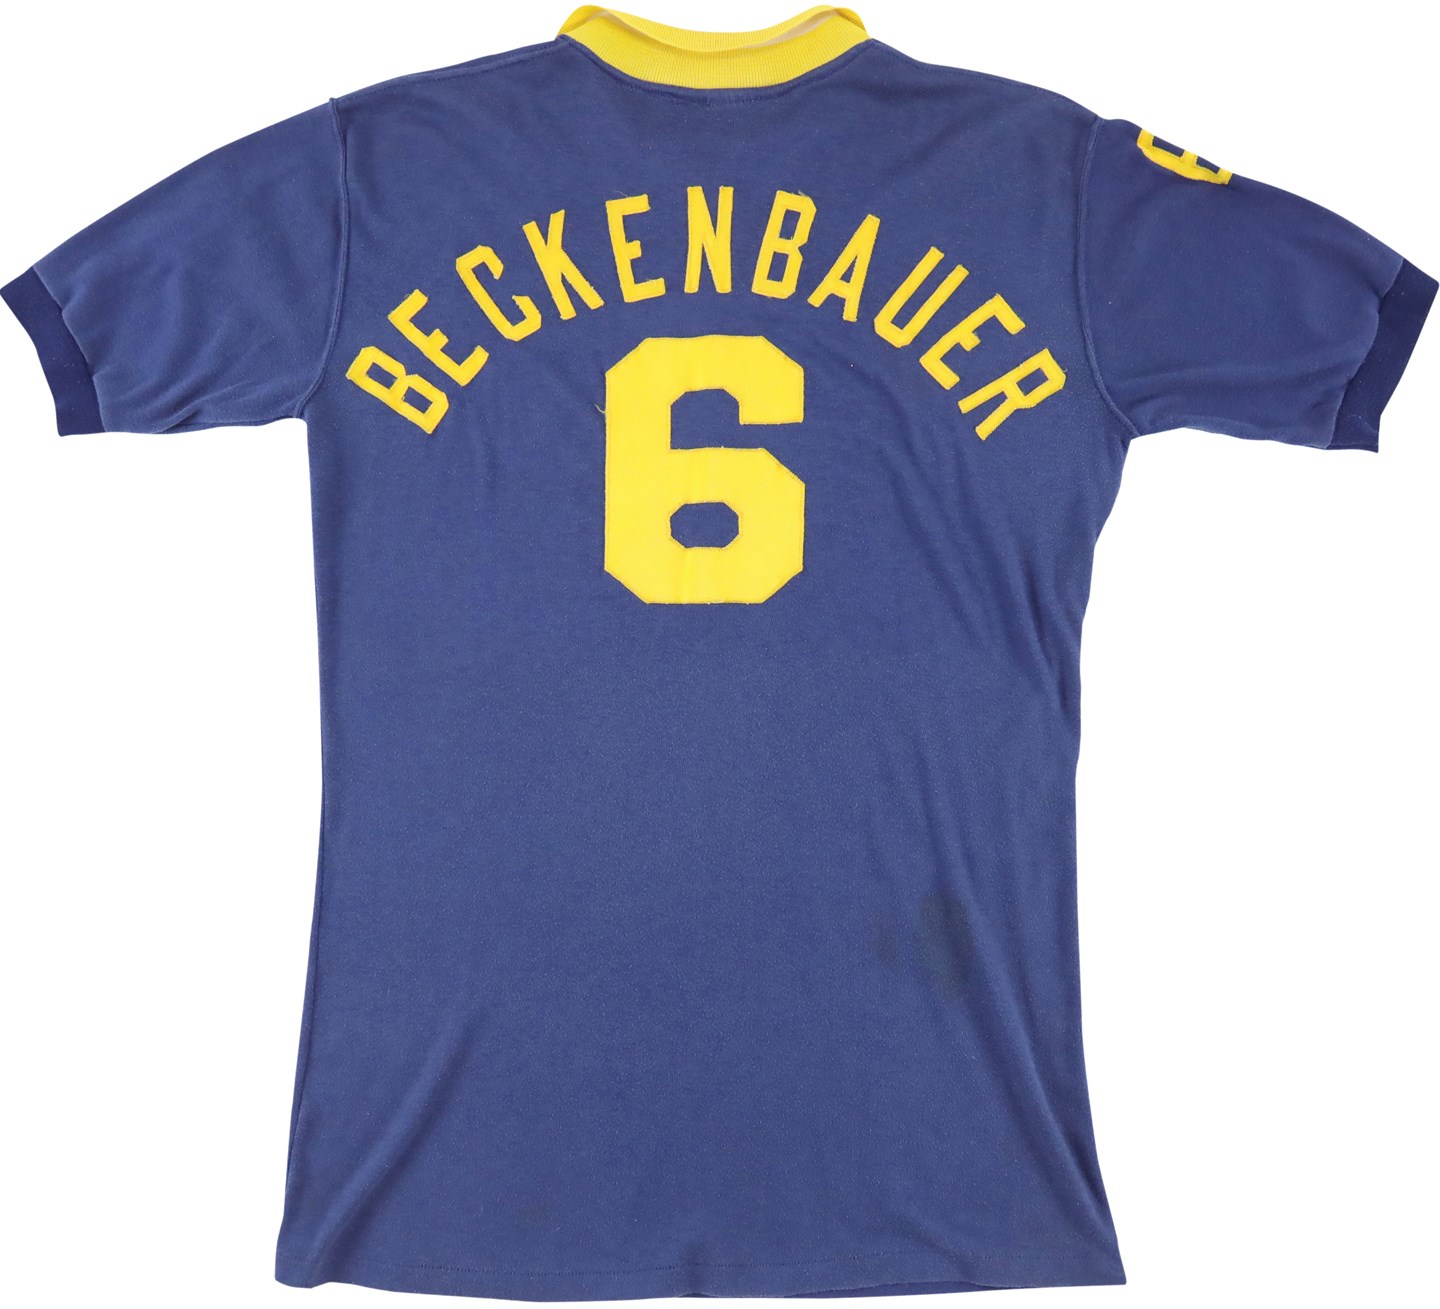 Olympics and All Sports - irca 1979 Franz Beckenbauer New York Cosmos Game Worn Jersey